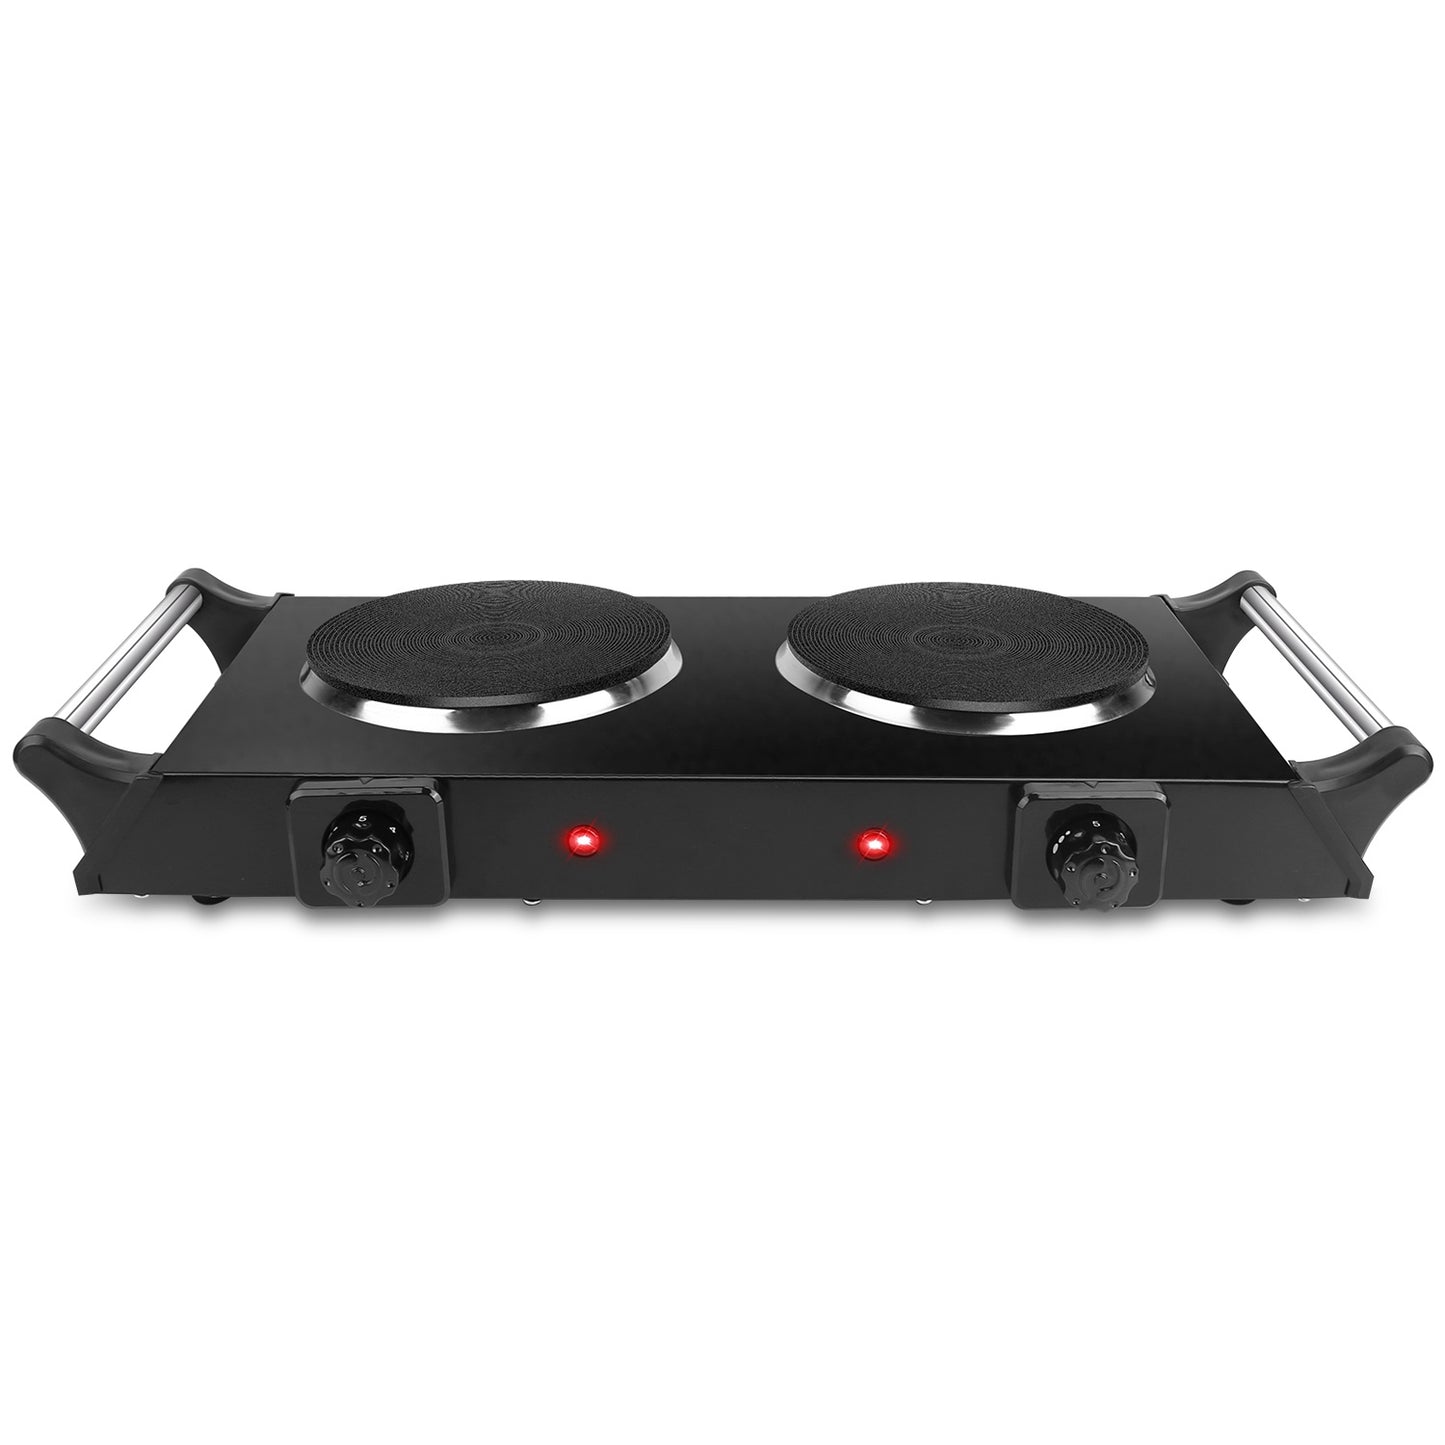 2000W Electric Dual Burner Portable Coil Heating Hot Plate Stove